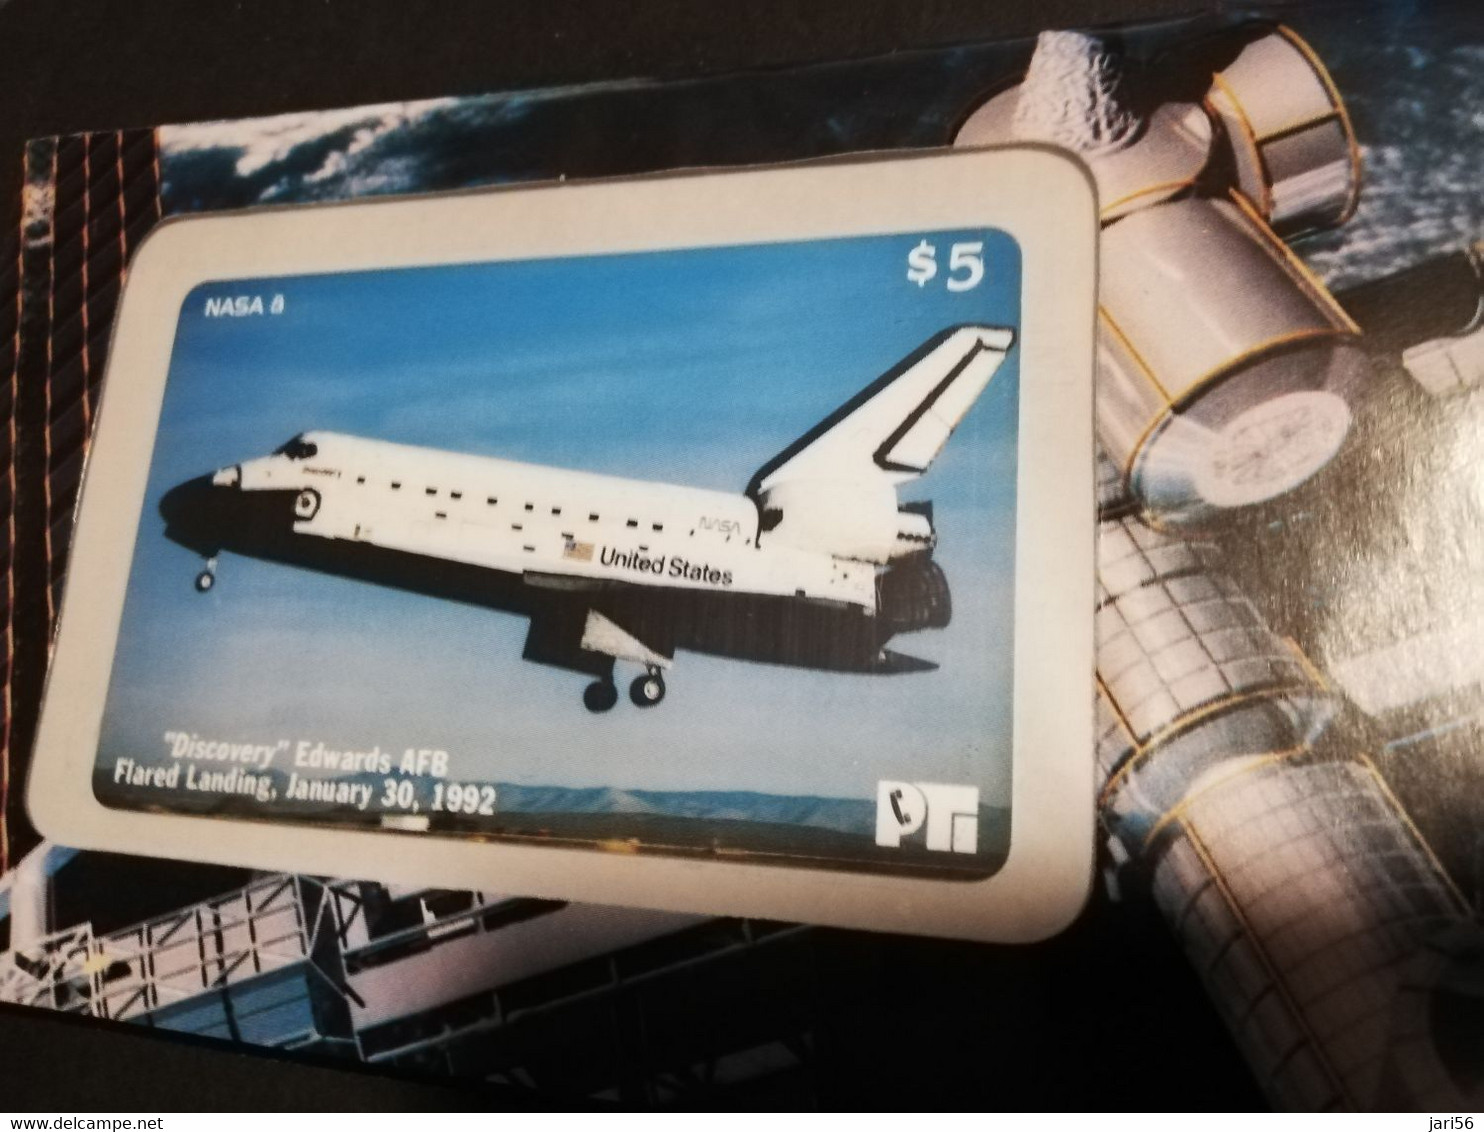 UNITED STATES  NASA SERIES  /SPACE SHUTTLE/NO 5 T/M 20  PTI  SCARCE/16CARDS /IN ENVELOP / MINT/LIMITED EDITION ** 6162**